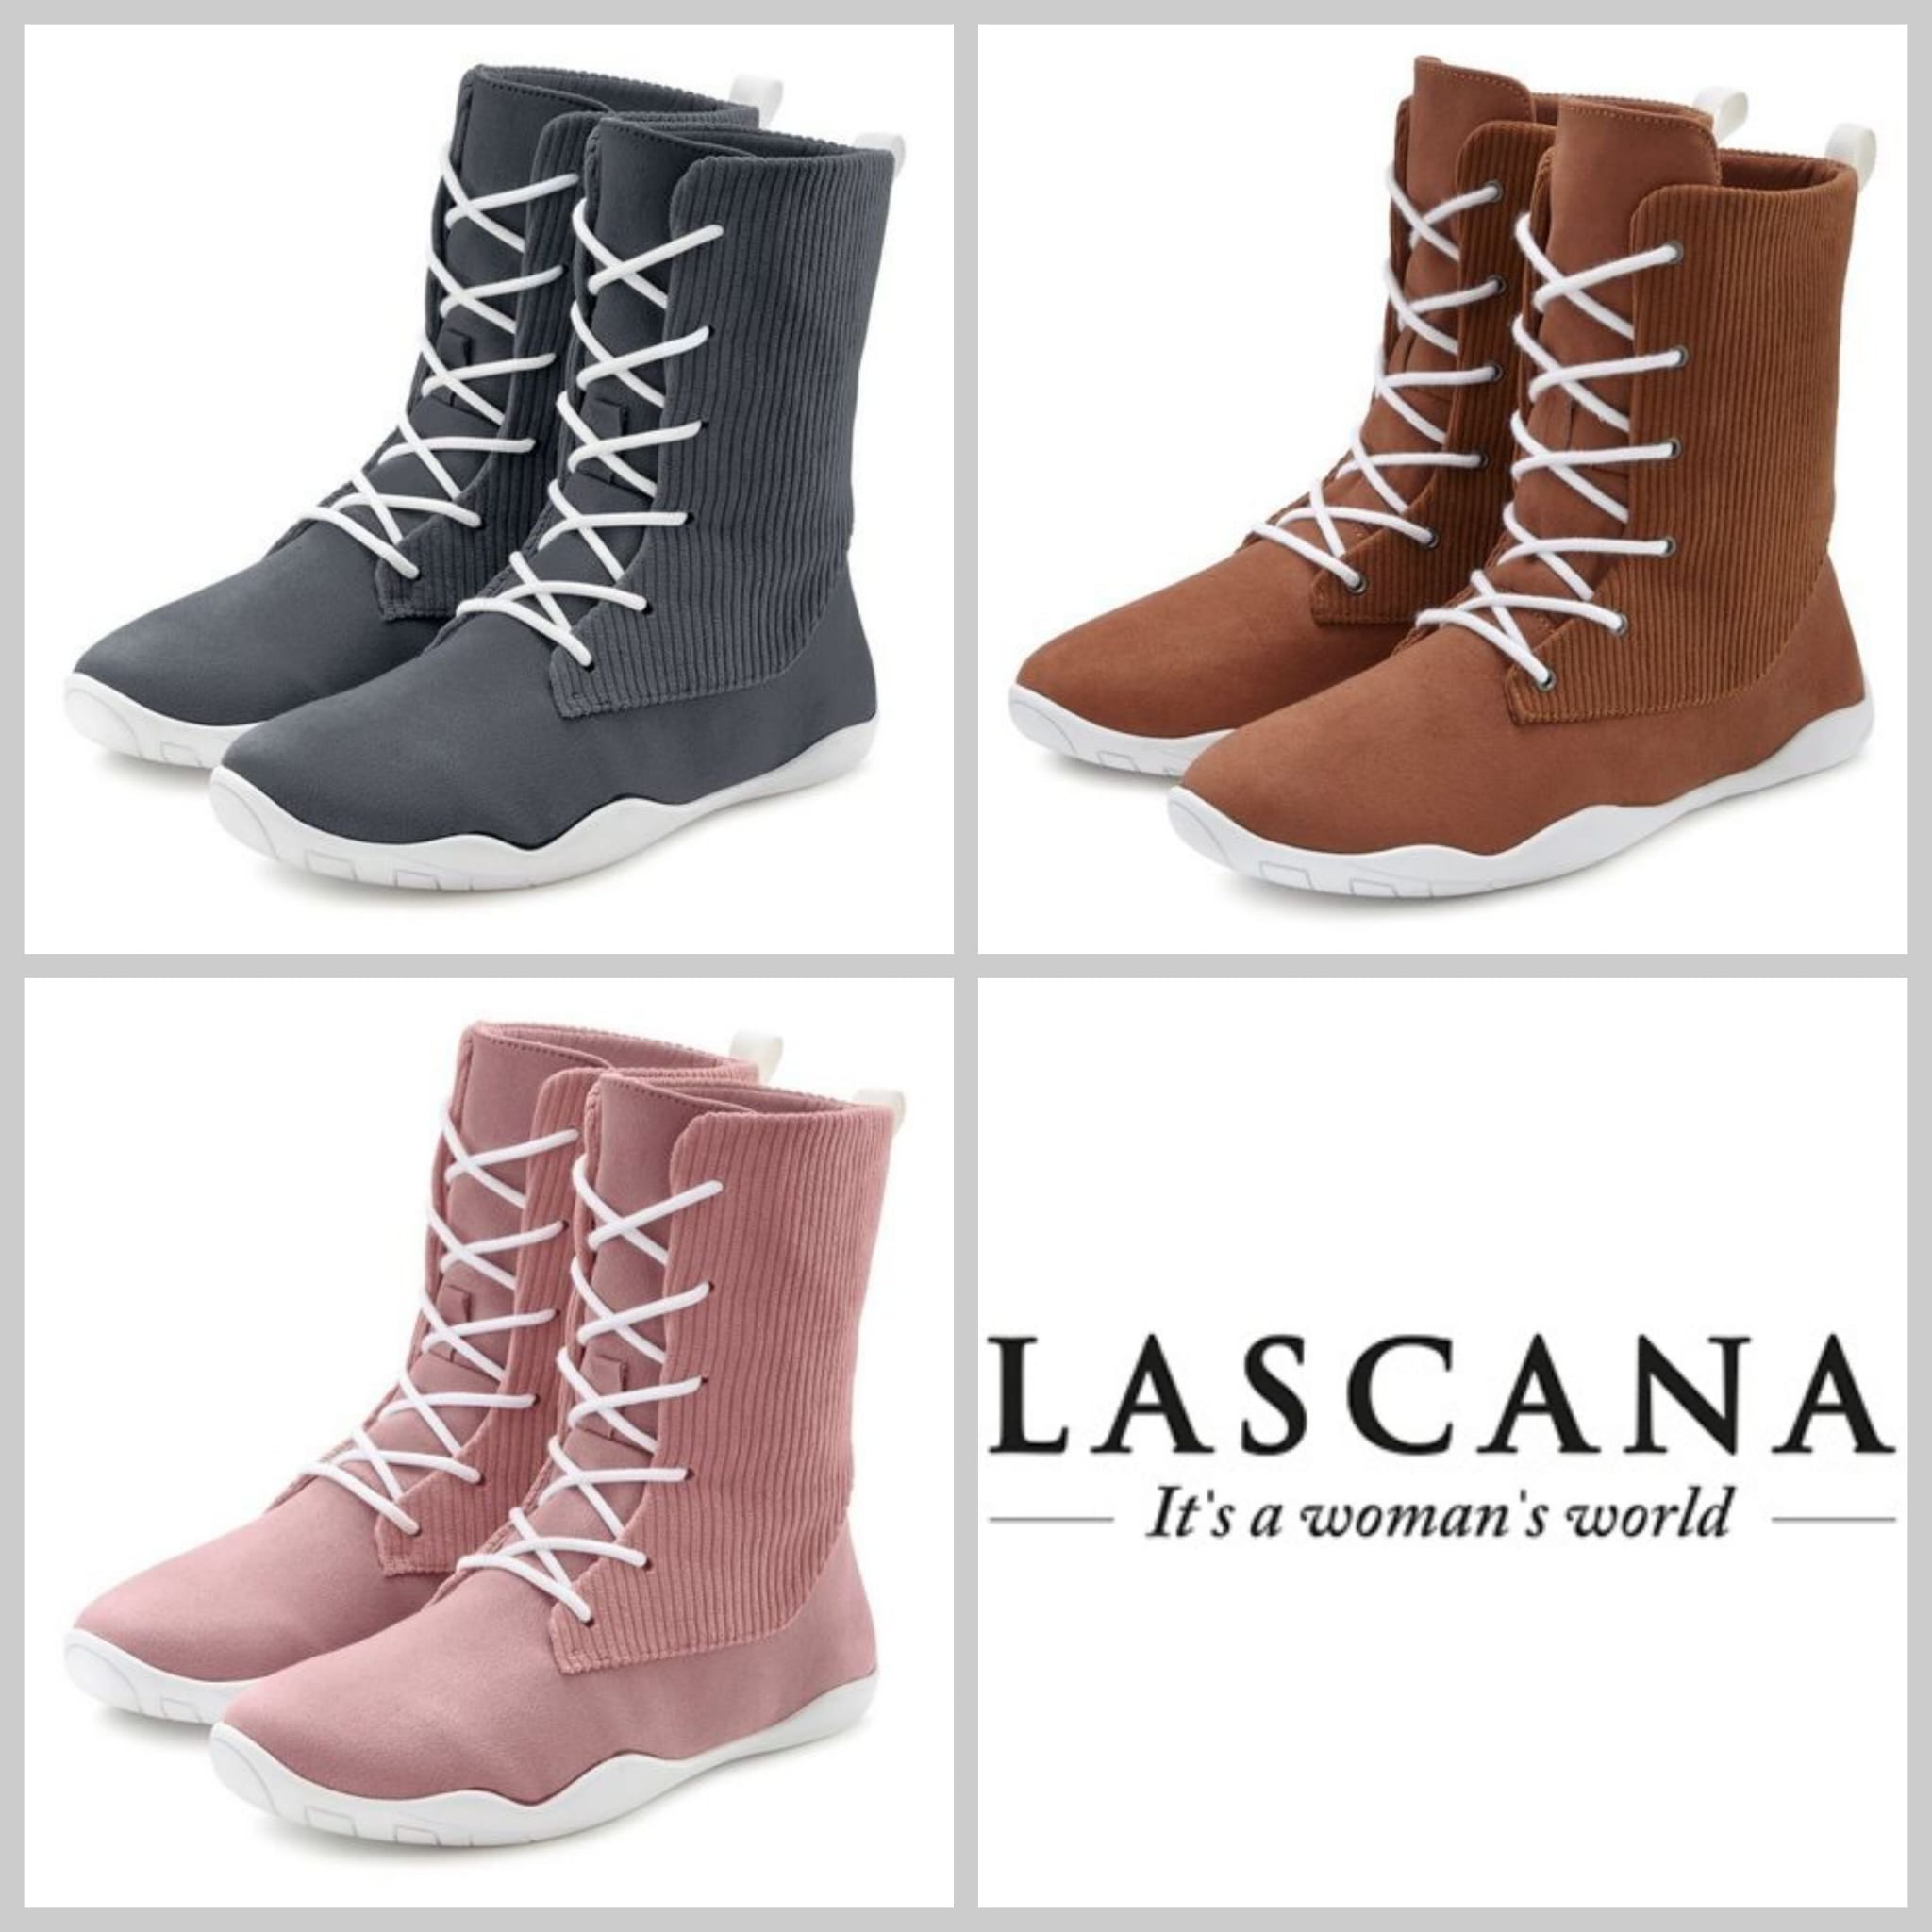 Women's boots from Lascana